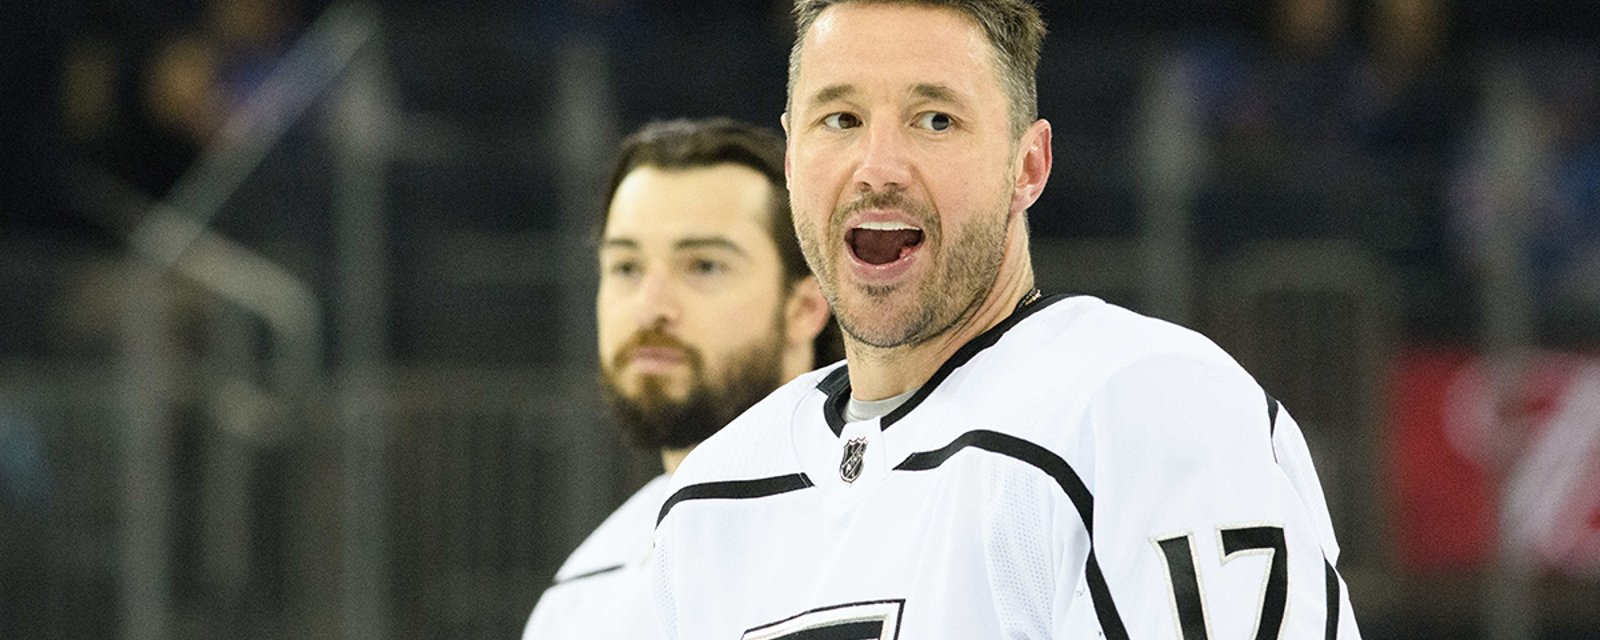 Breaking: Kovalchuk has agreed to waive no-trade clause, Eastern Conference contender reportedly in pursuit